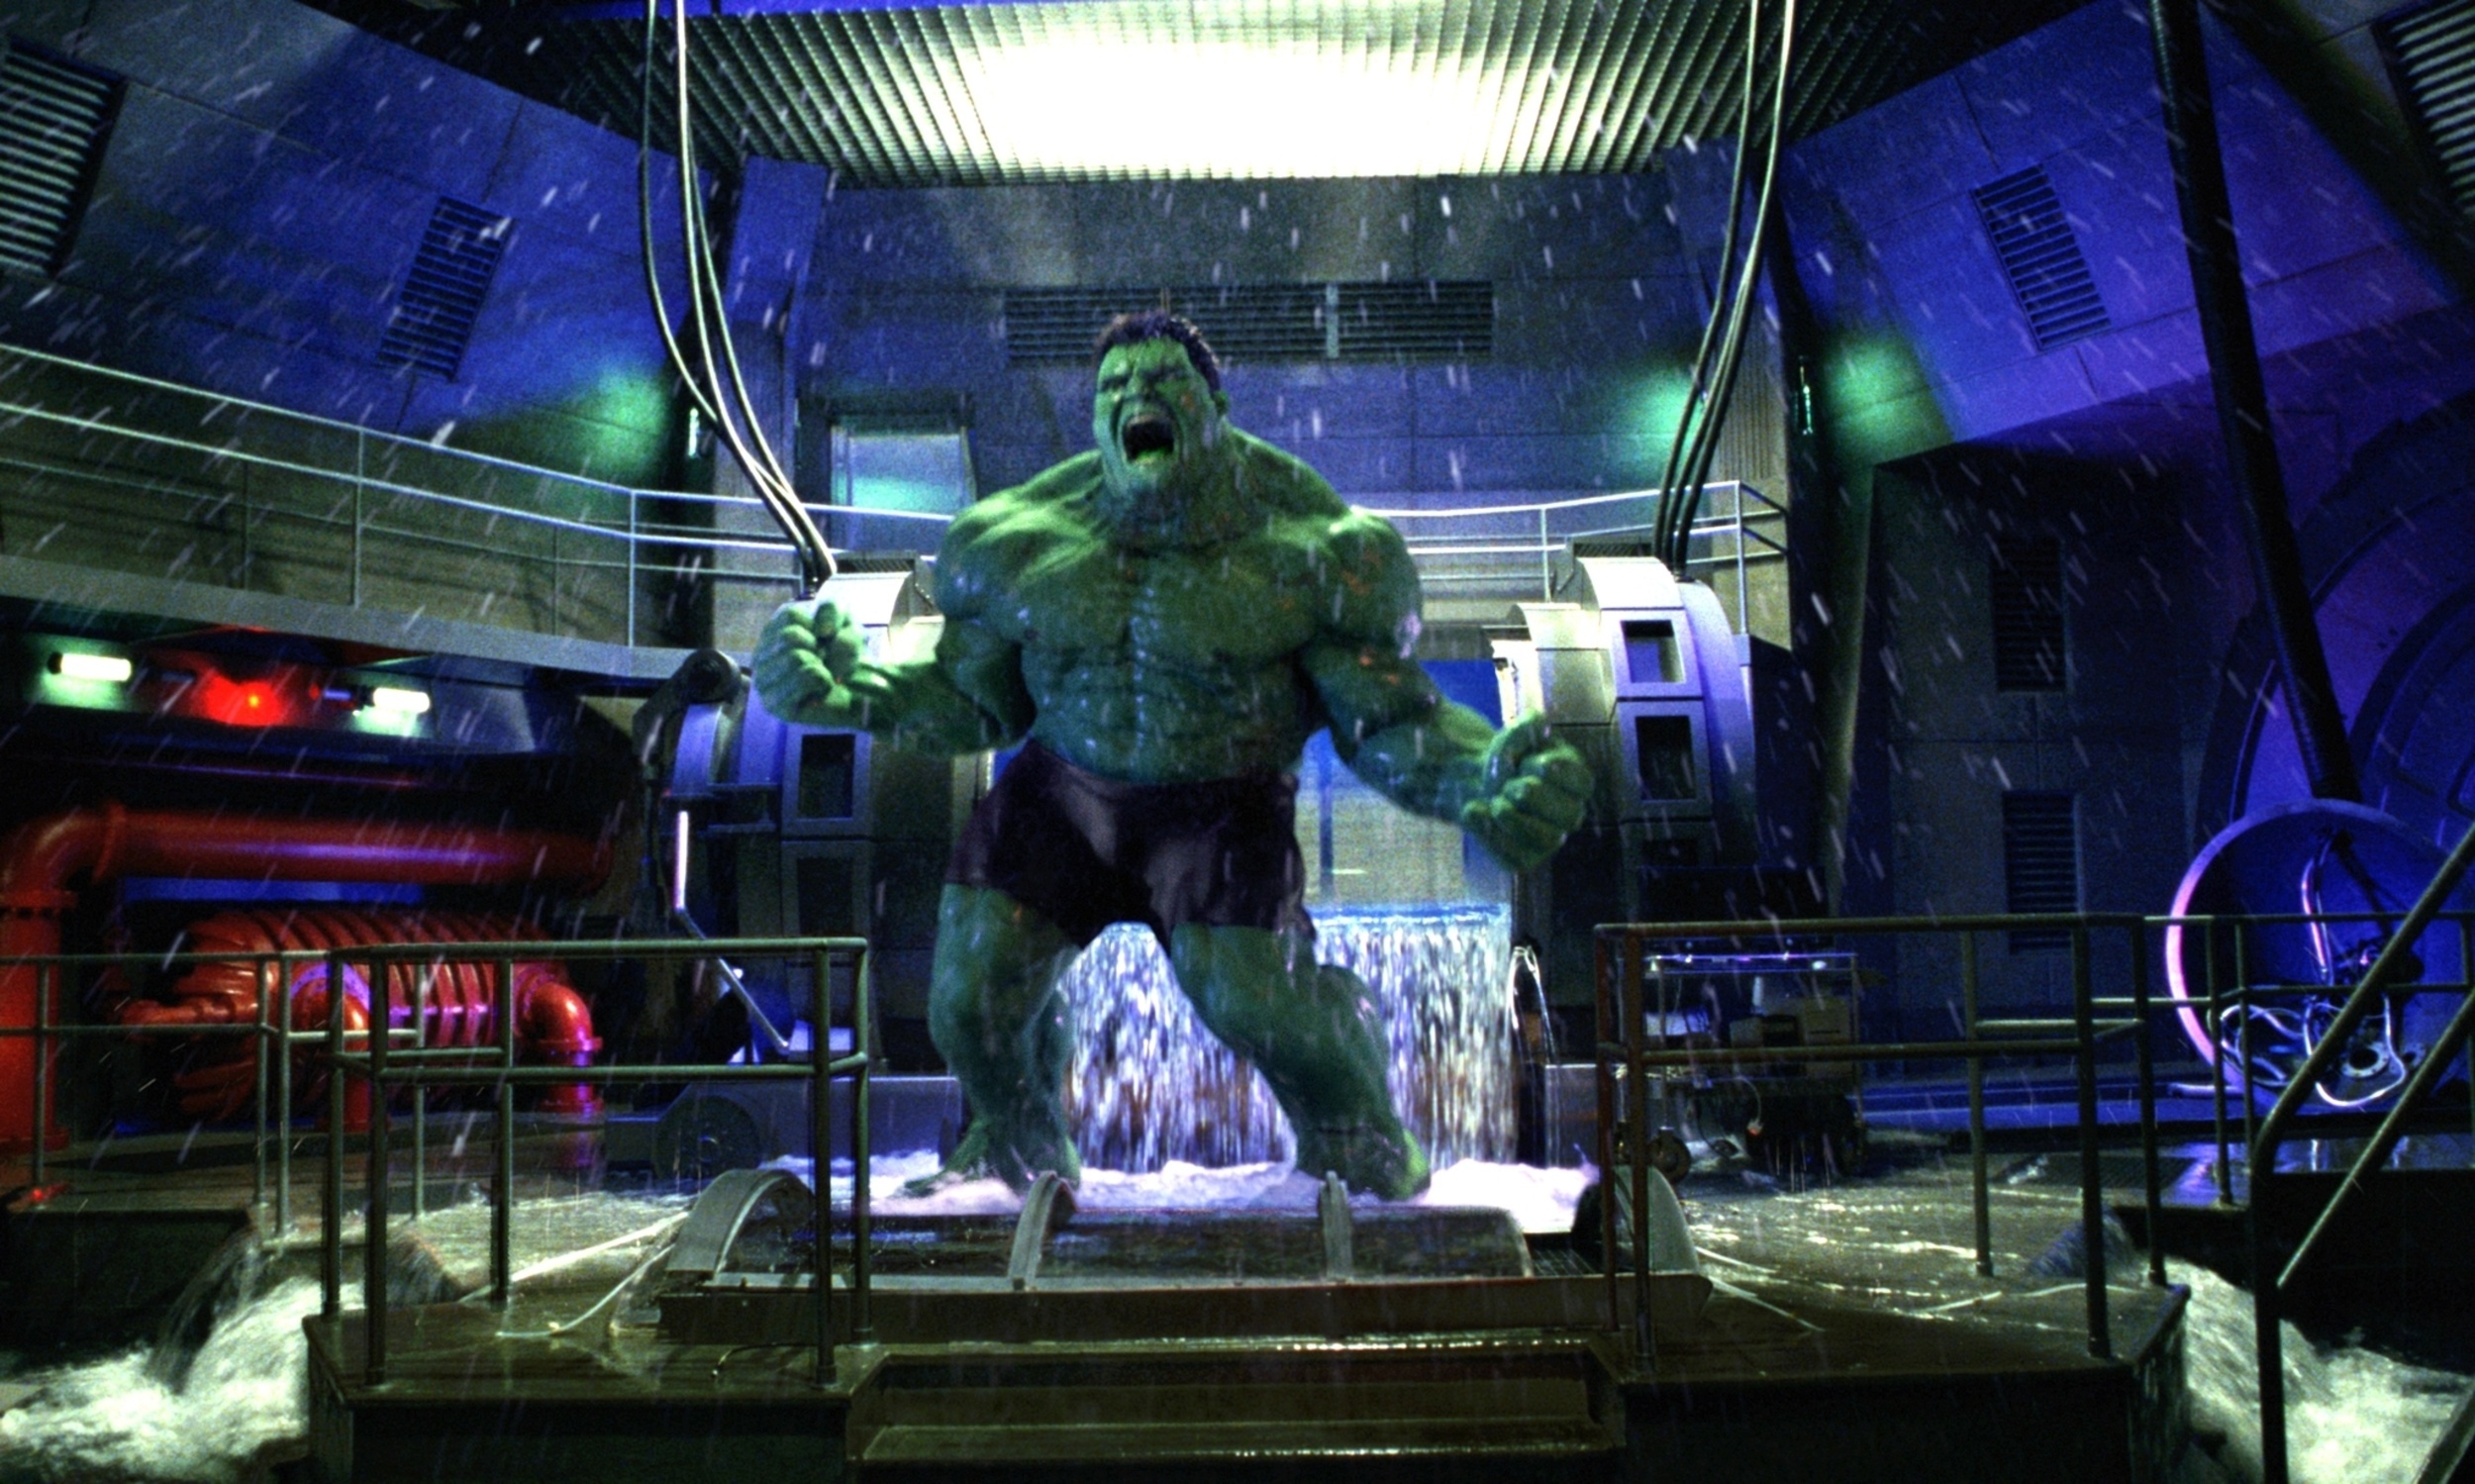 <p>Mychael Danna, who had done composer work on Lee’s films in the past, was given the role of providing the score for <em>Hulk</em>. Lee wanted a non-traditional superhero movie score, and Danna provided one, using African drumming, Arabic singing, and Japanese influences as well. This was too much for the studio, who rejected the score. They then brought in heavy hitter Danny Elfman, who liked Danna’s work and used some of it in his own score anyway.</p><p>You may also like: <a href='https://www.yardbarker.com/entertainment/articles/21_of_country_musics_greatest_voices/s1__38994195'>21 of country music's greatest voices</a></p>